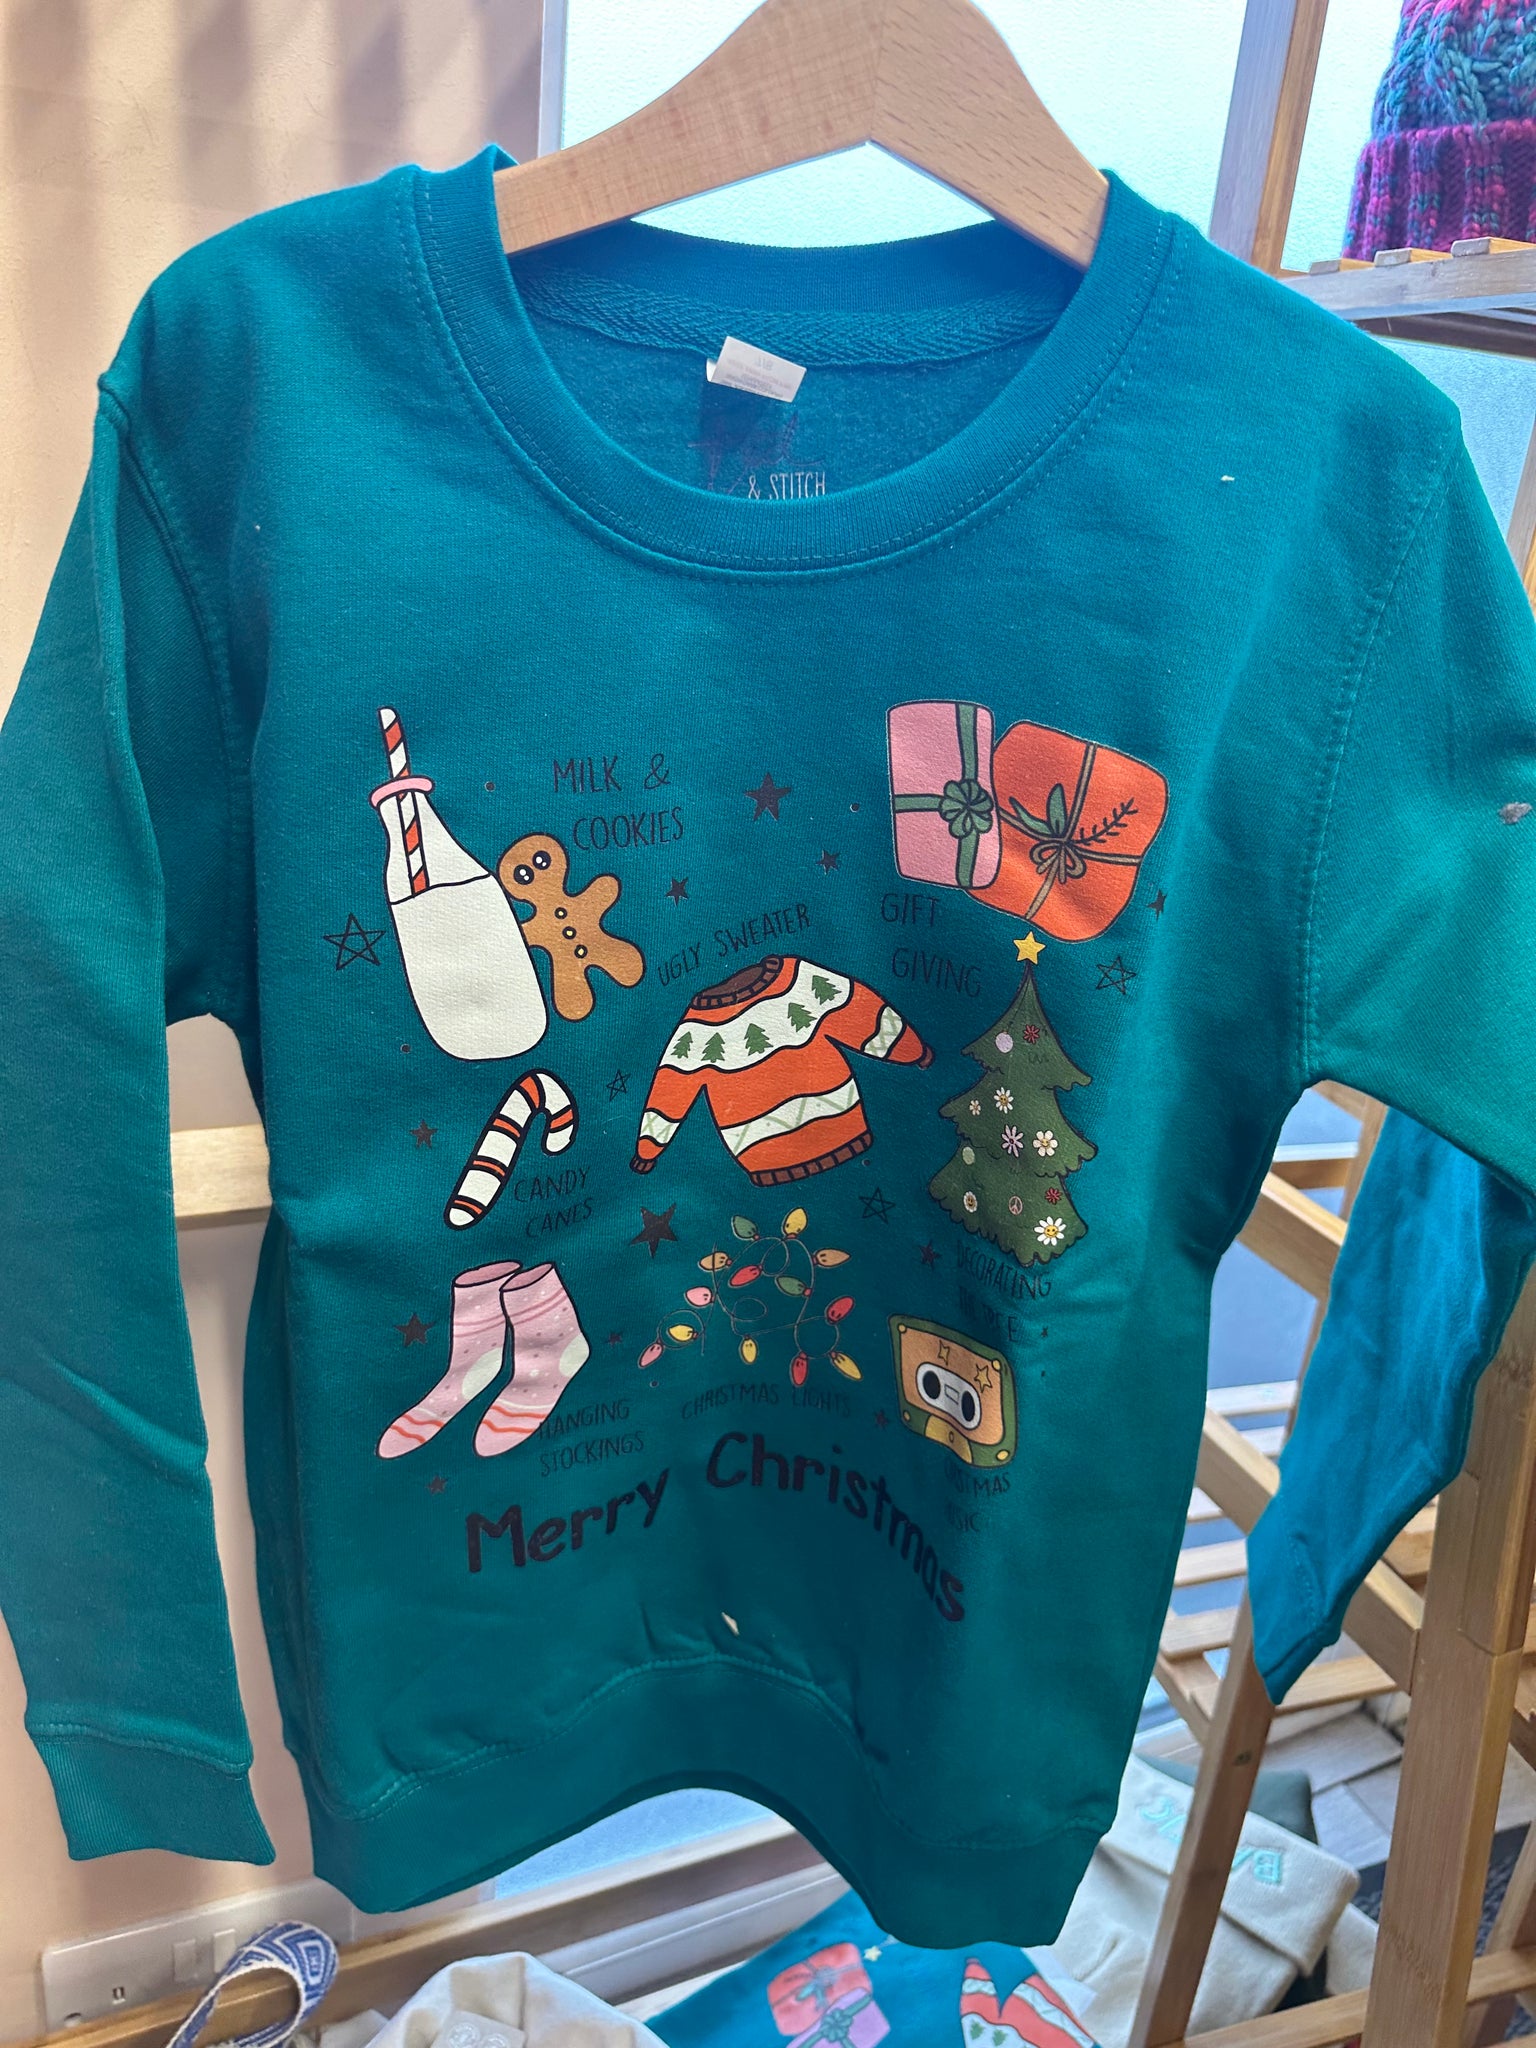 SAMPLE SALE My Favourite Christmas Things Jumper Size Kids 7-8